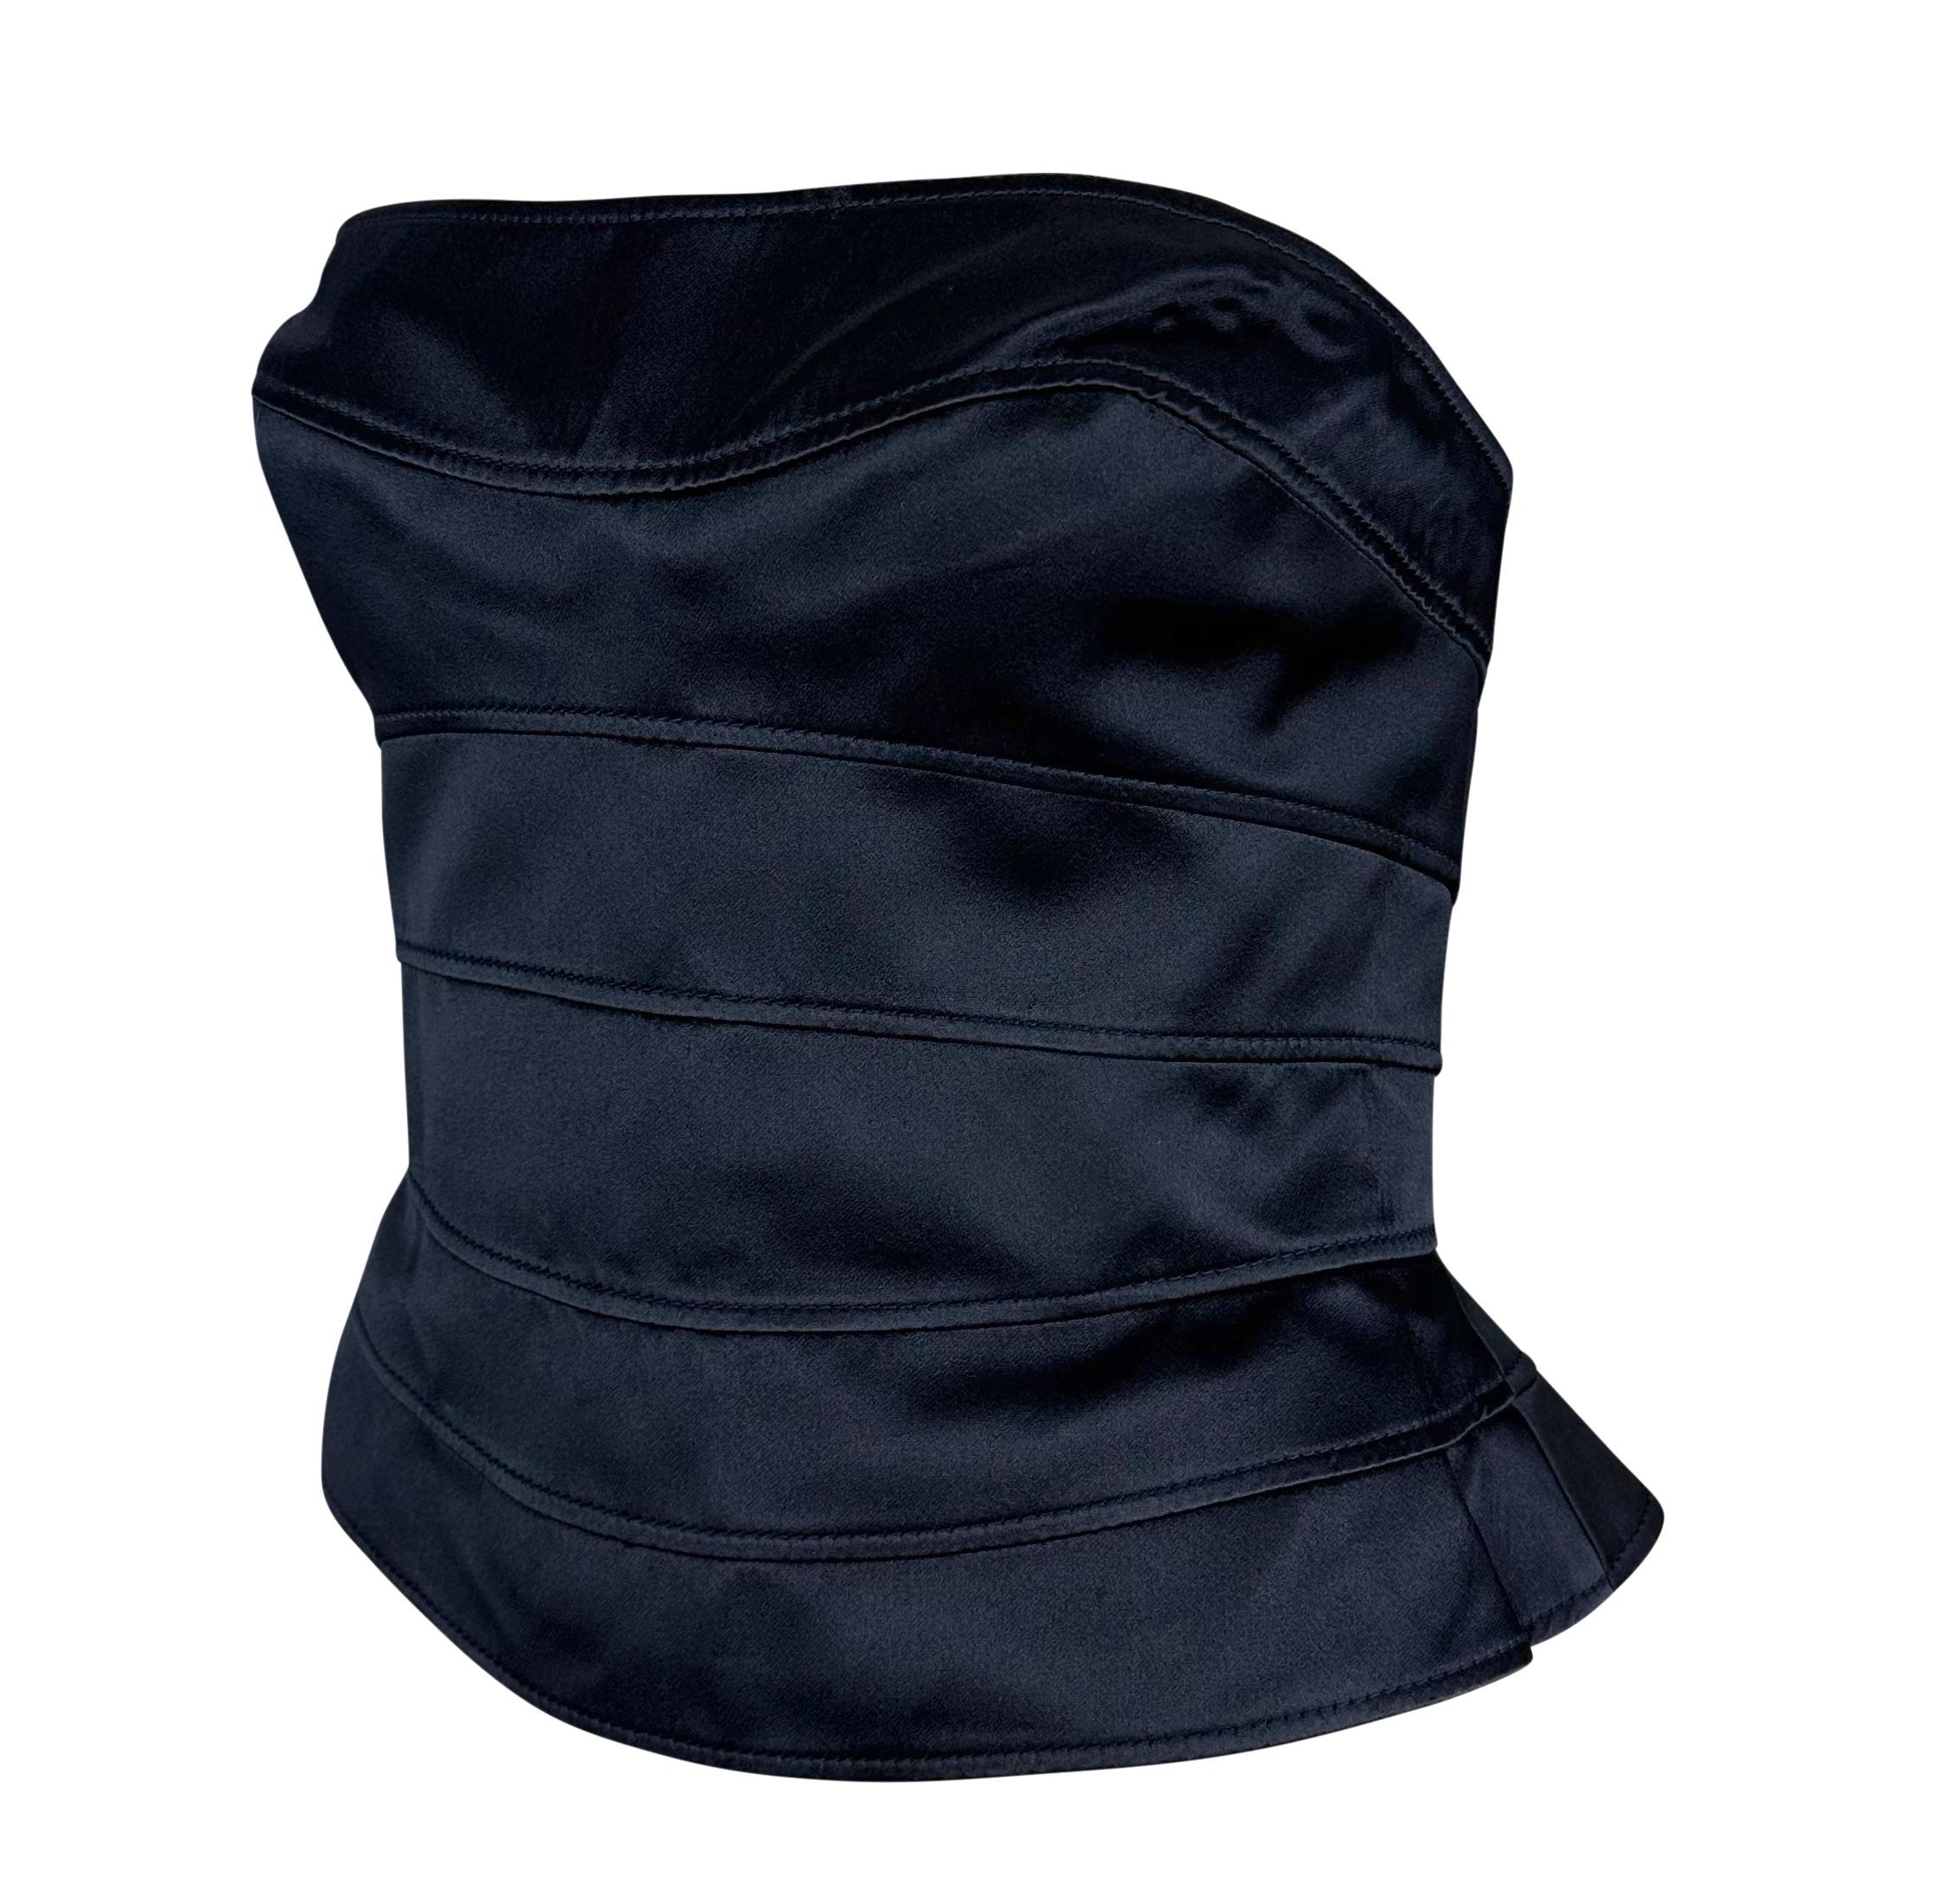 Presenting a fabulous black silk satin Thierry Mugler strapless corset top, designed by Manfred Mugler. From the 1990s, this stunning top is constructed entirely of horizontal navy silk satin panels. This Thierry Mugler creation perfectly